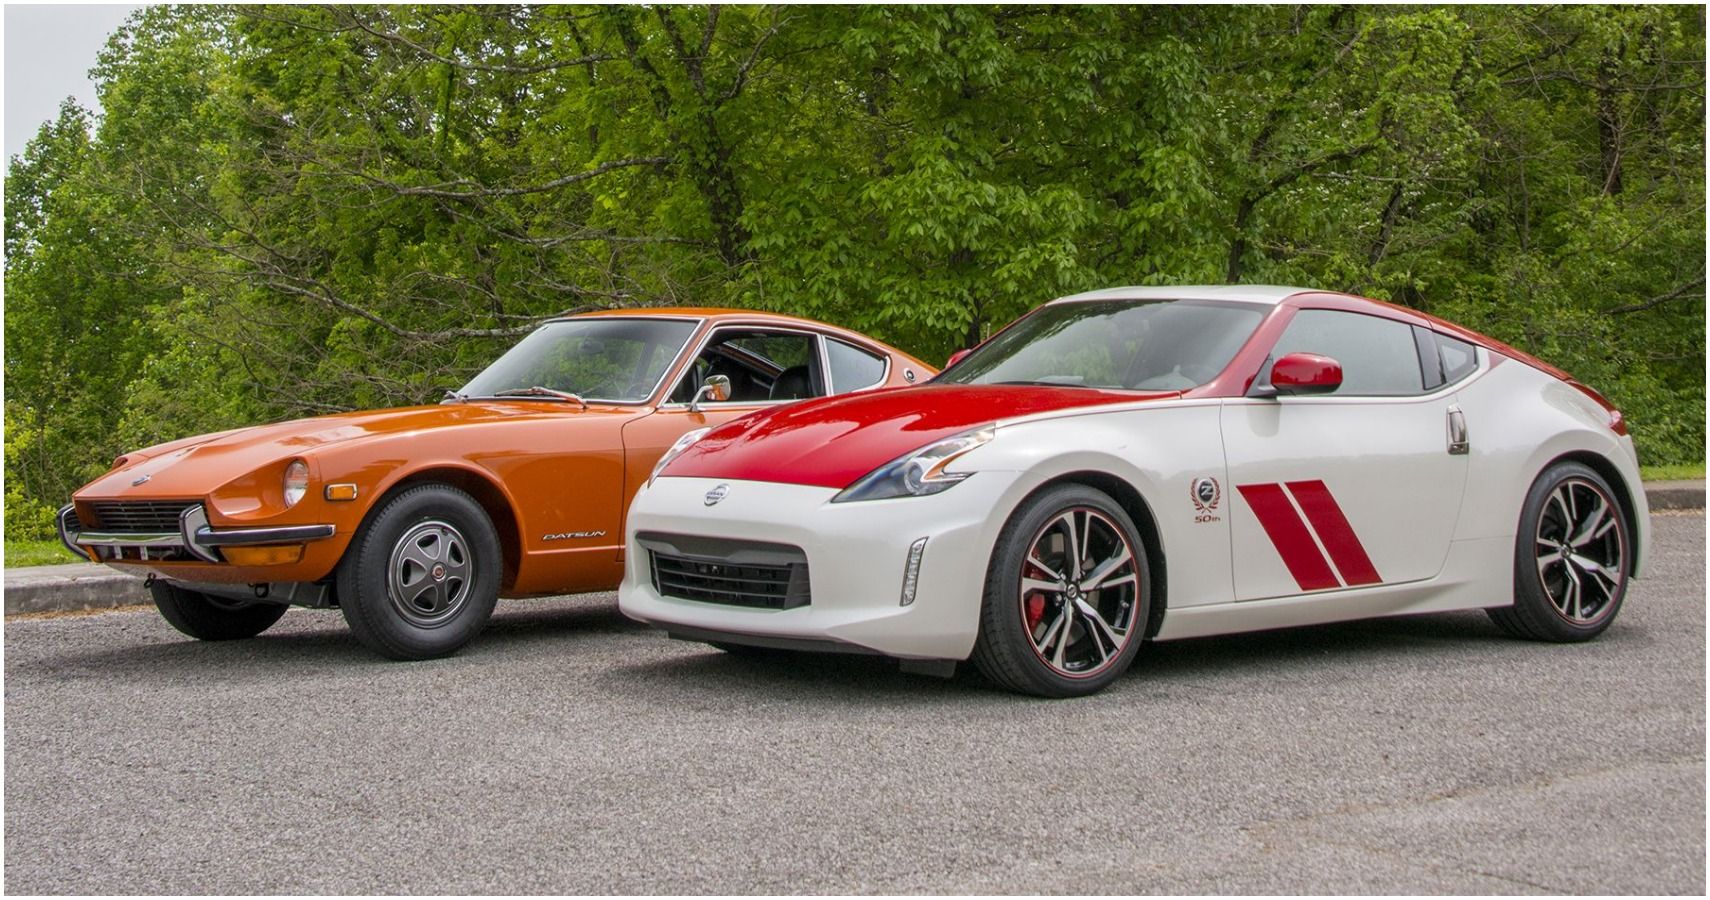 10 Things You Probably Didn't Know About Nissan's Z Cars